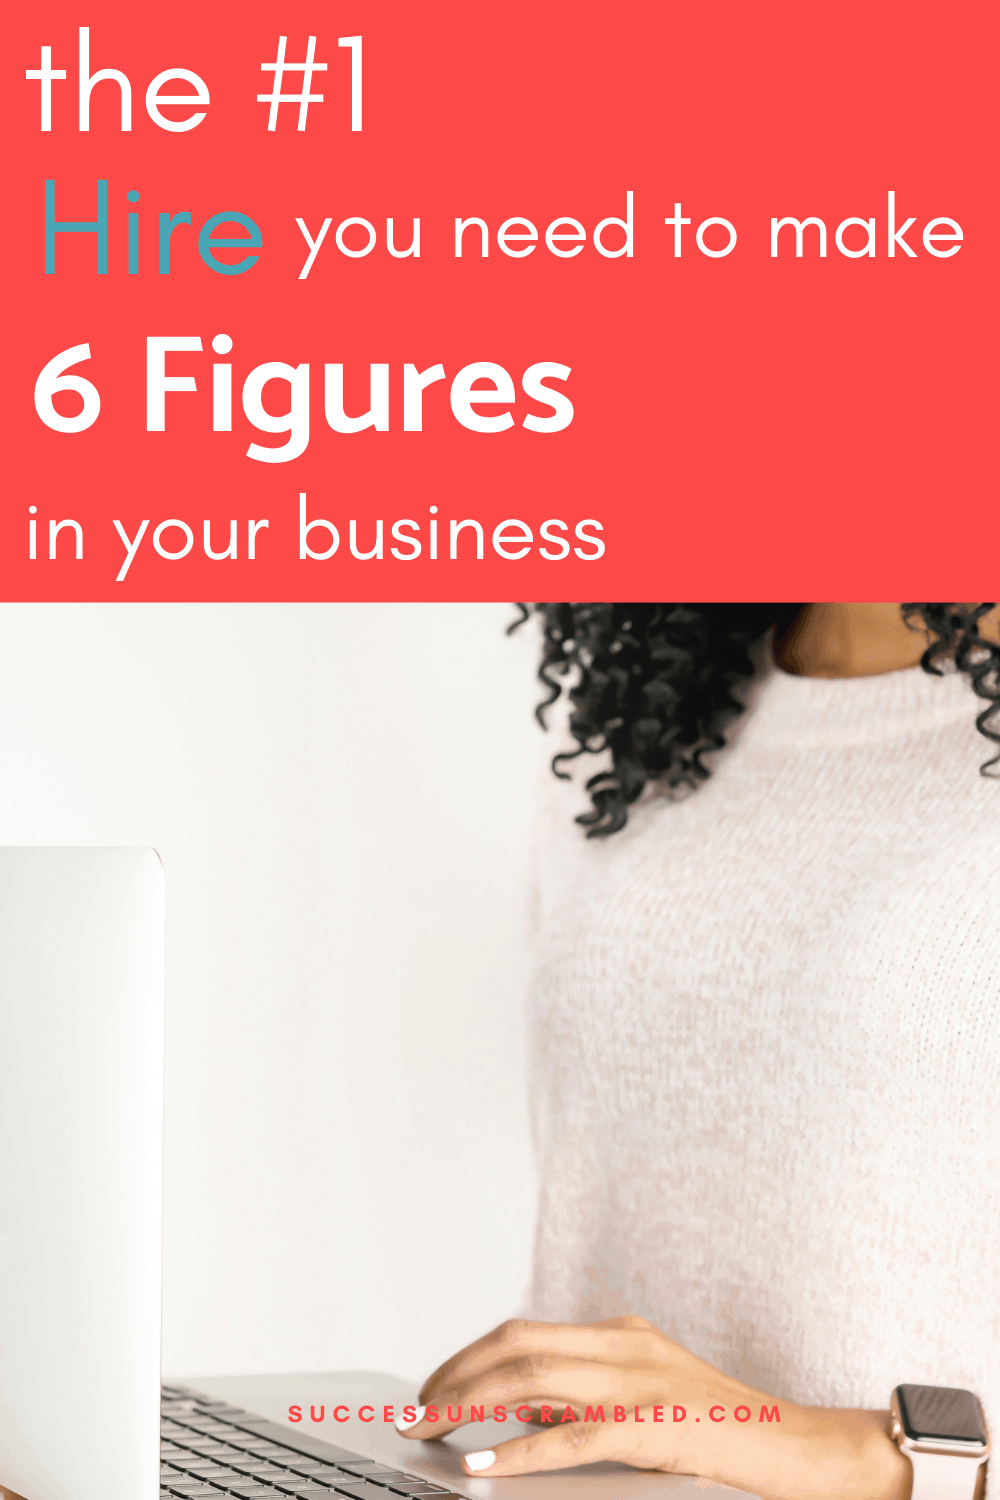 number one hire you need to make 6 figures in your business